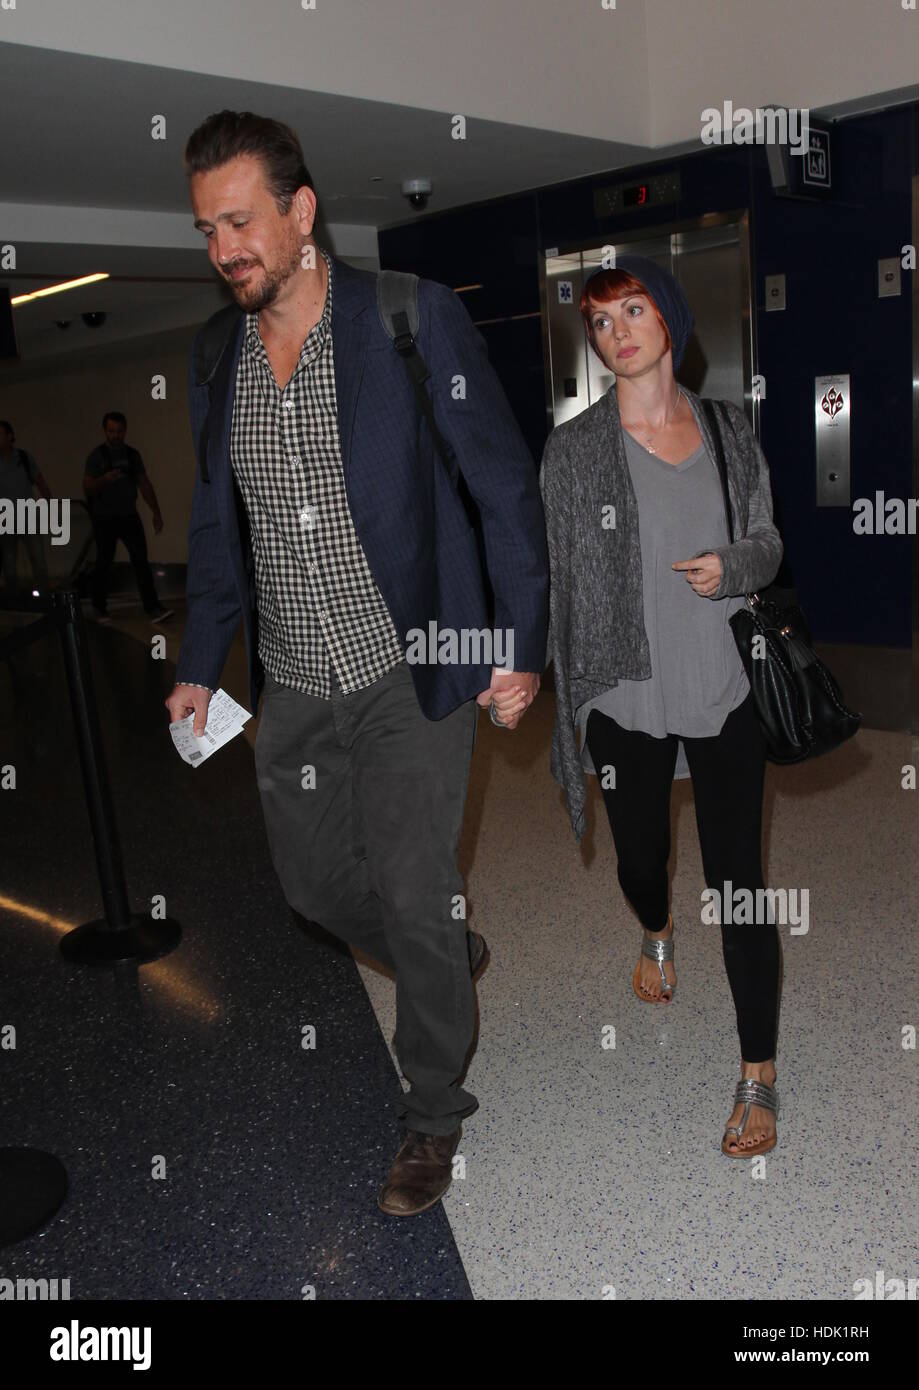 Jason Segel departs from the airport with his girlfriend photographer Alexis Mixter  Featuring: Jason Segel, Alexis Mixter Where: Los Angeles, California, United States When: 13 Oct 2016 Stock Photo